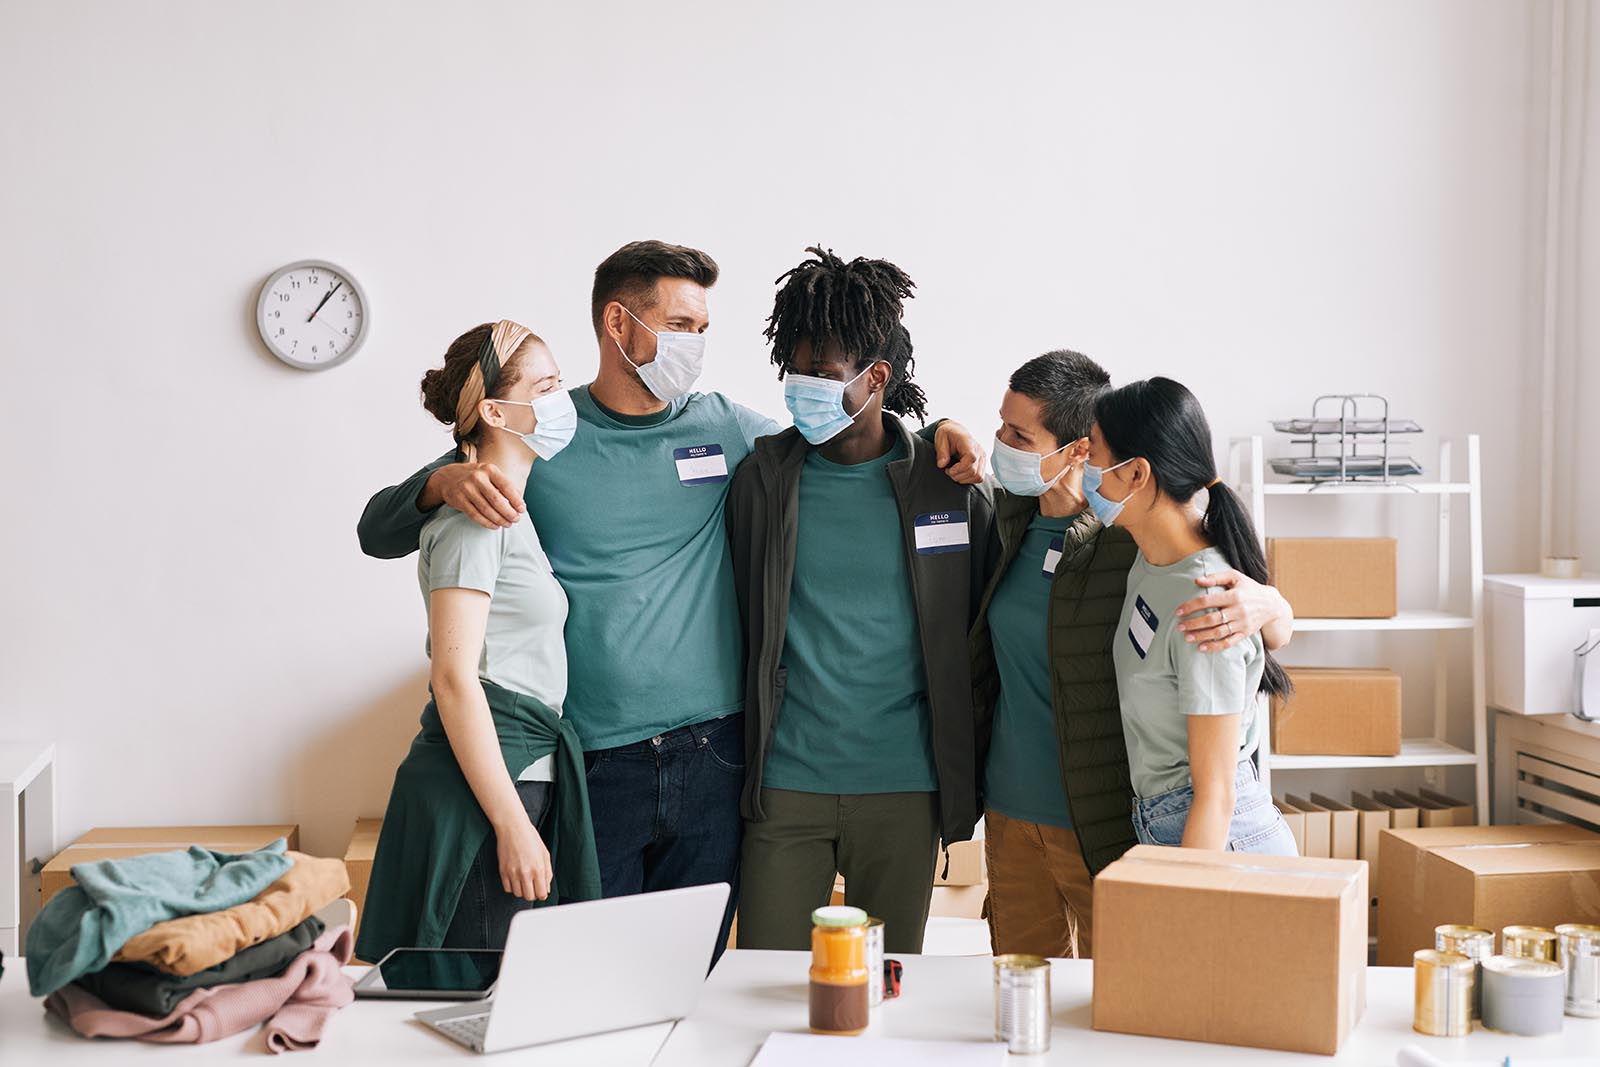 Diverse team of volunteers wearing masks while embracing at help and donation event, copy space